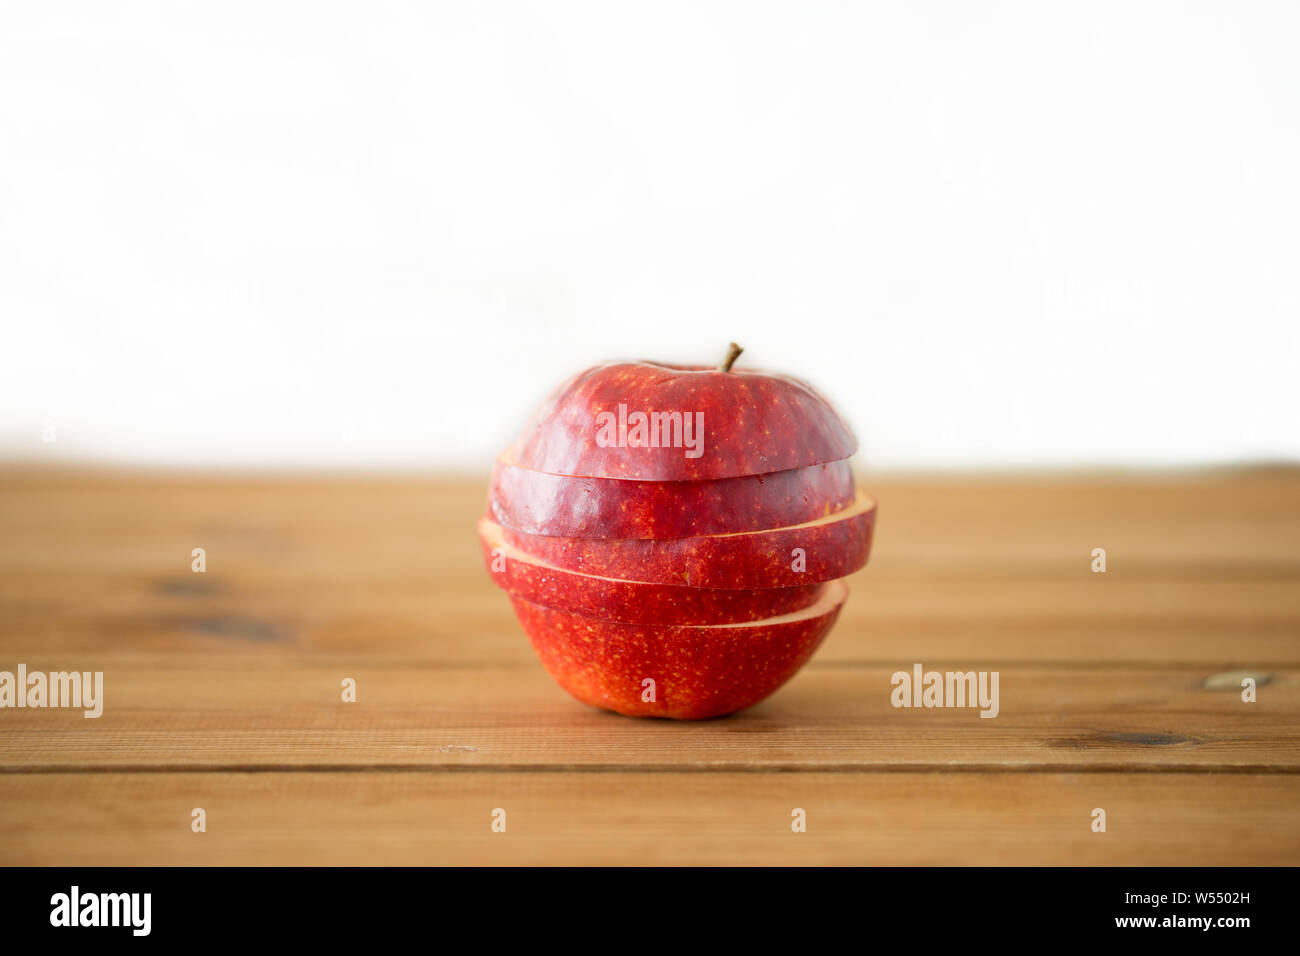 sliced red apple on wooden table Stock Photo